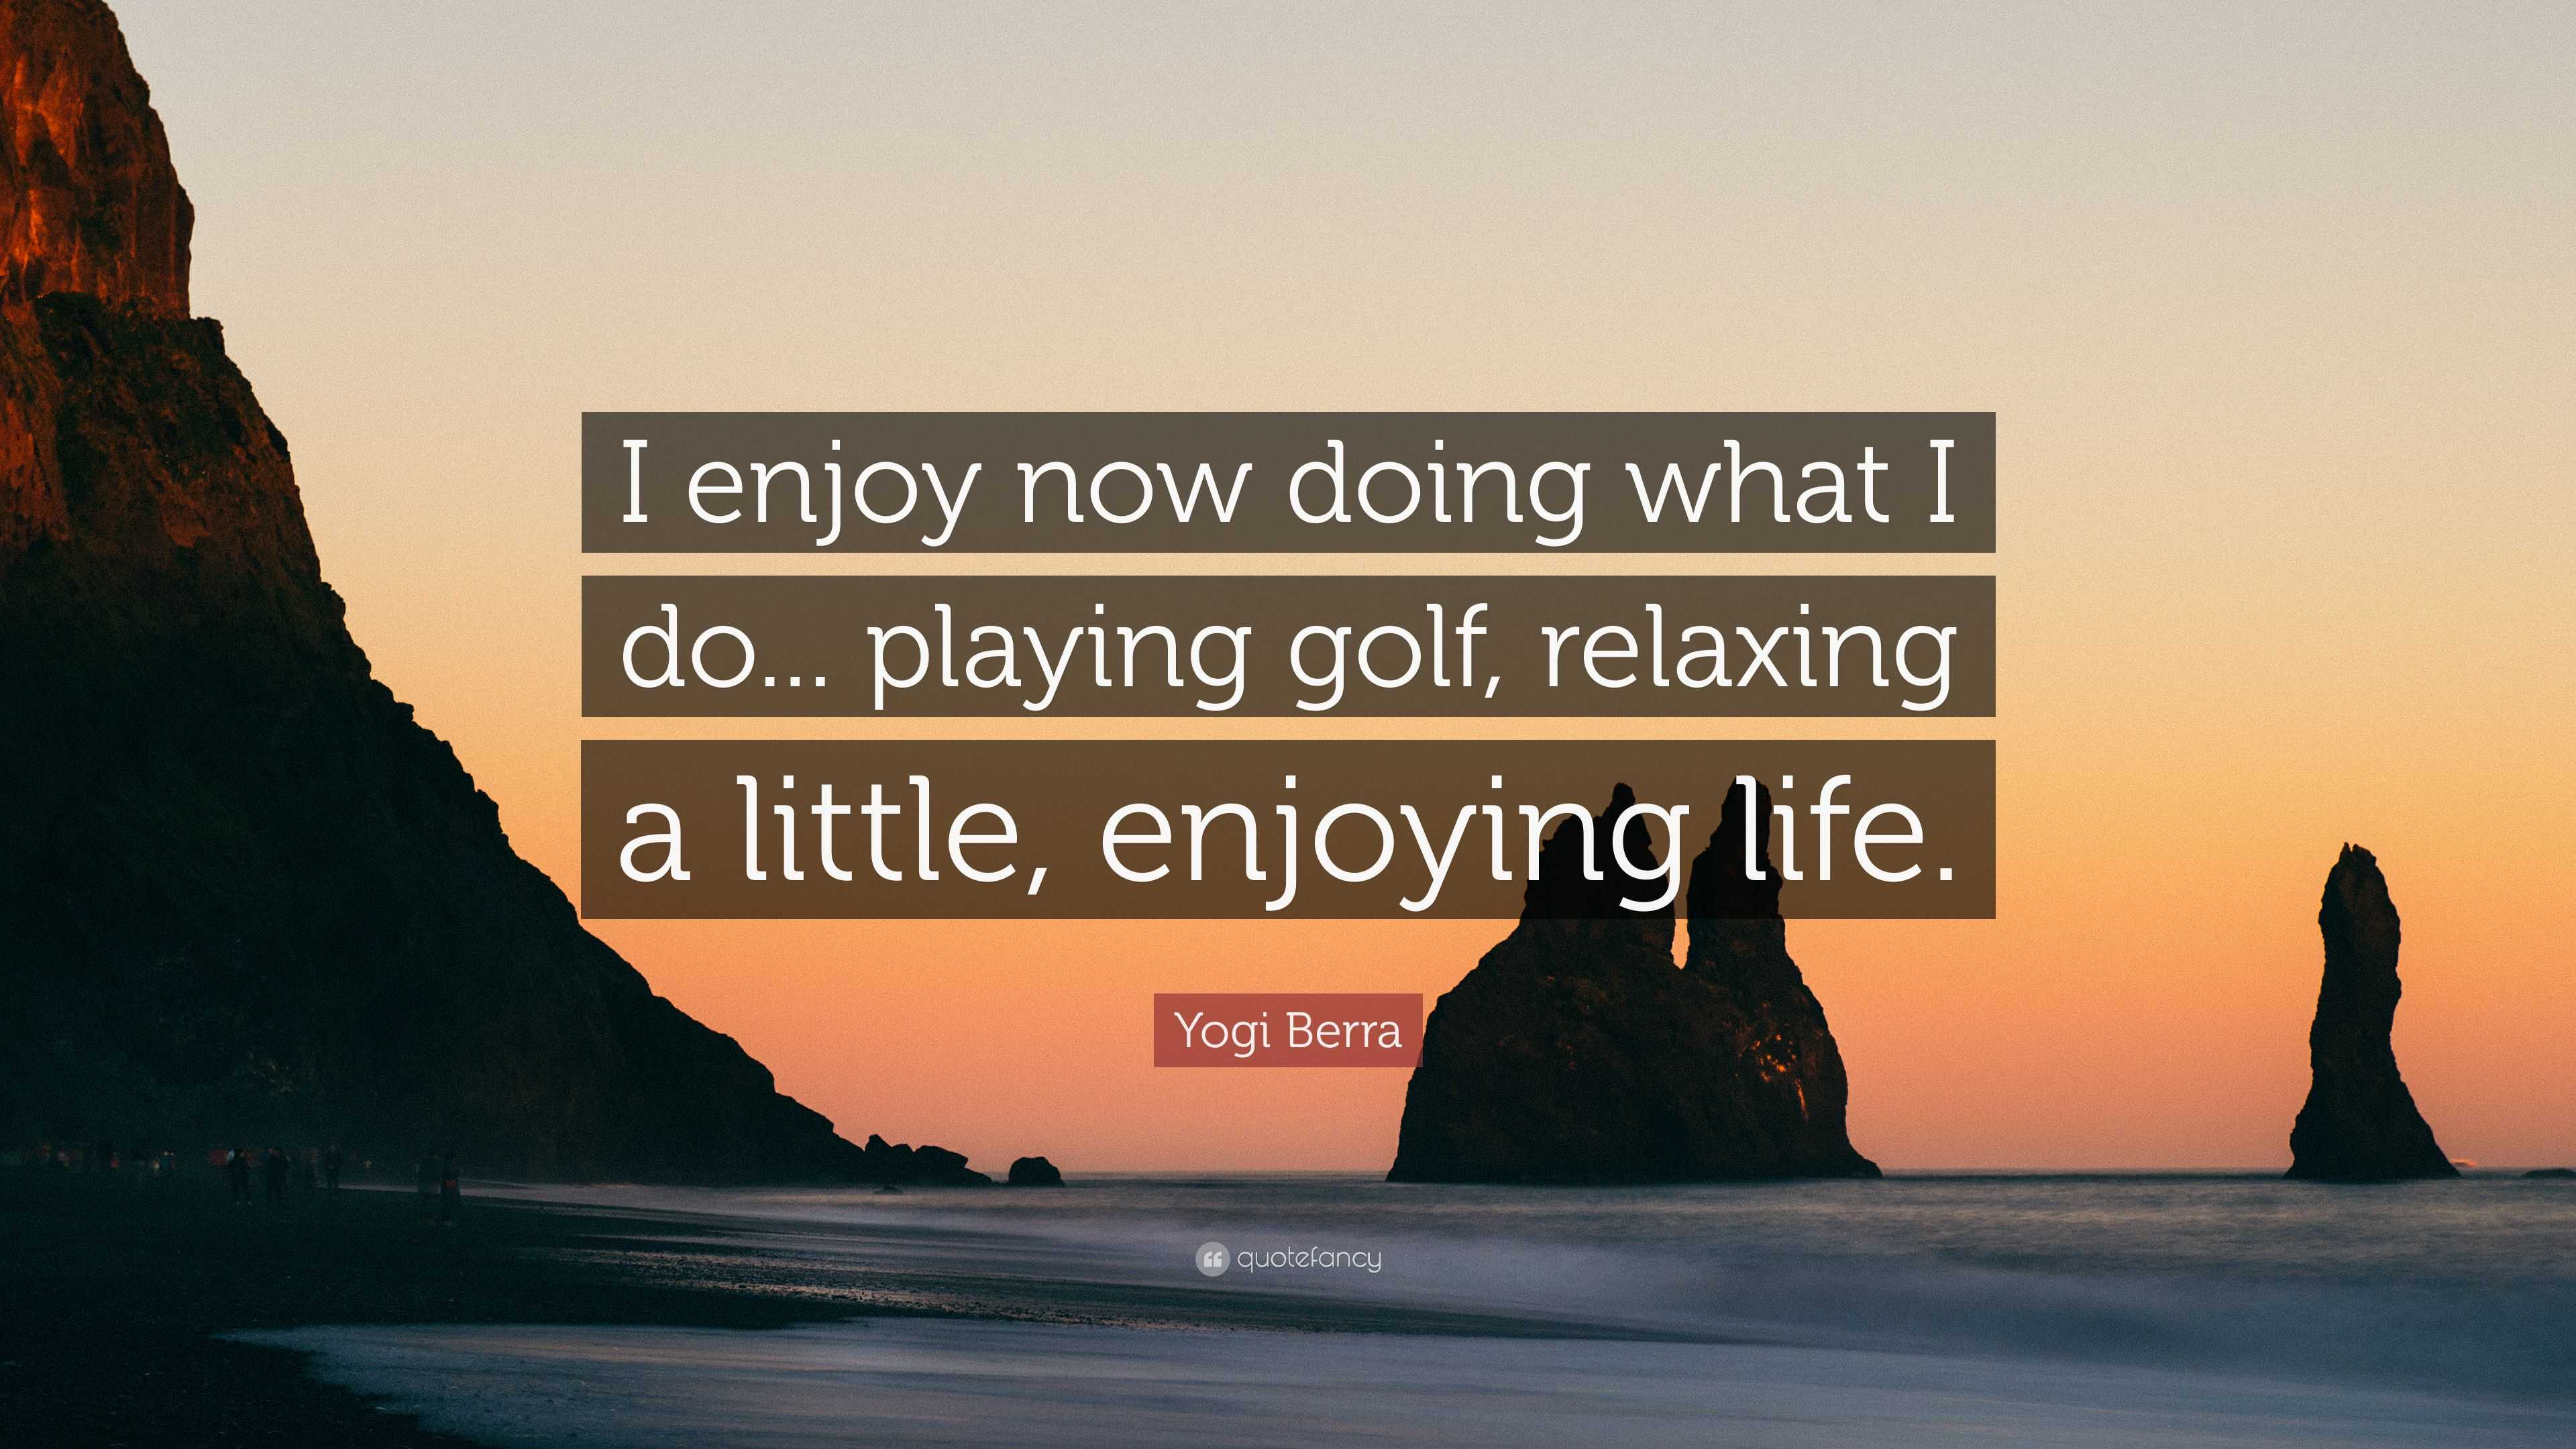 quotes on relaxing and enjoying life yogi berra quote u201ci enjoy now doing what i do playing golf